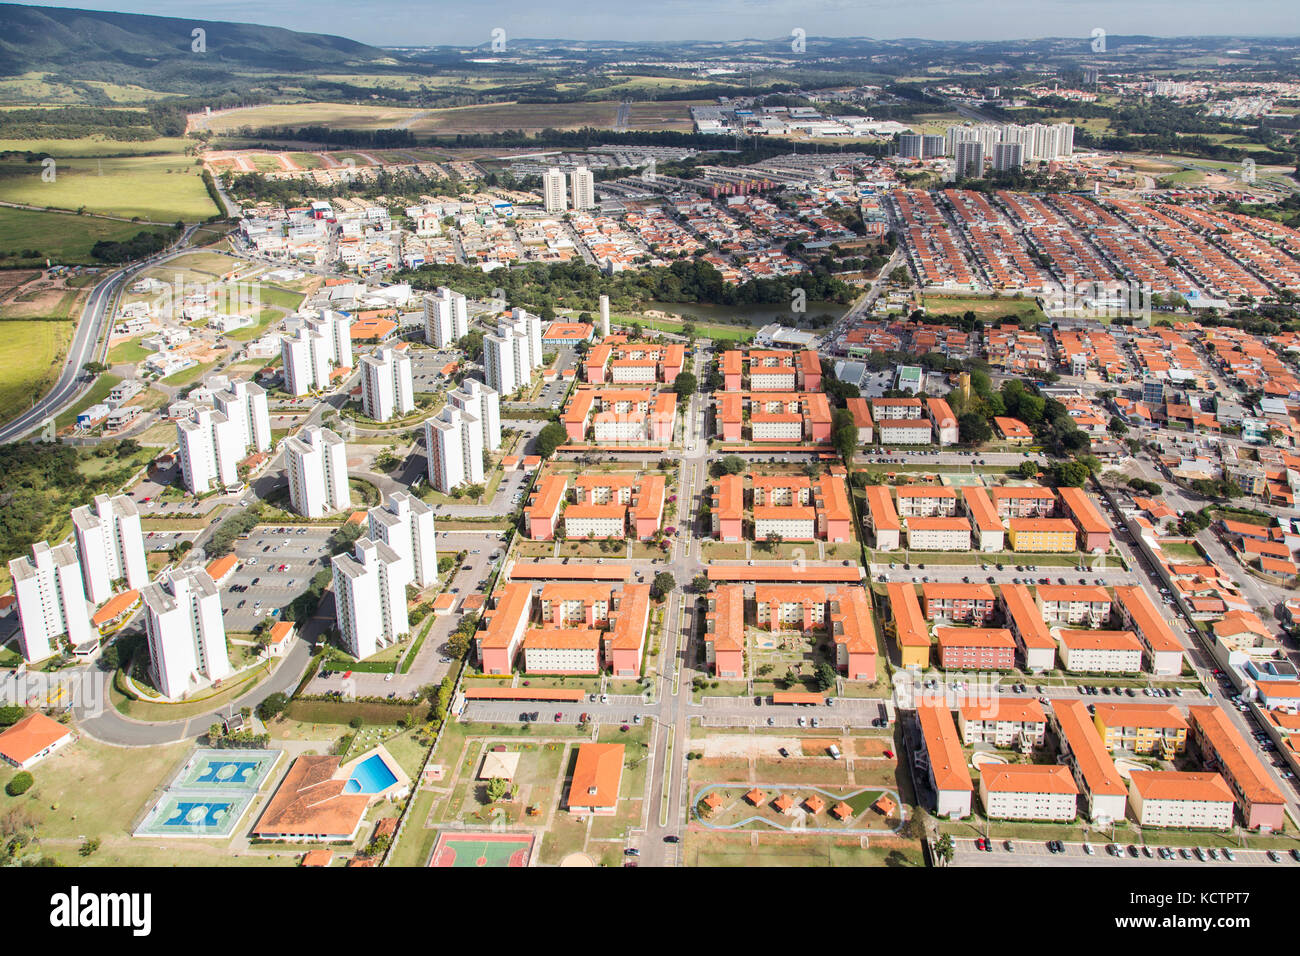 Aerial view of Jundiaí, city near São Paulo - Brazil. Houses and buildings at Eloy Chaves neighborhood. Stock Photo